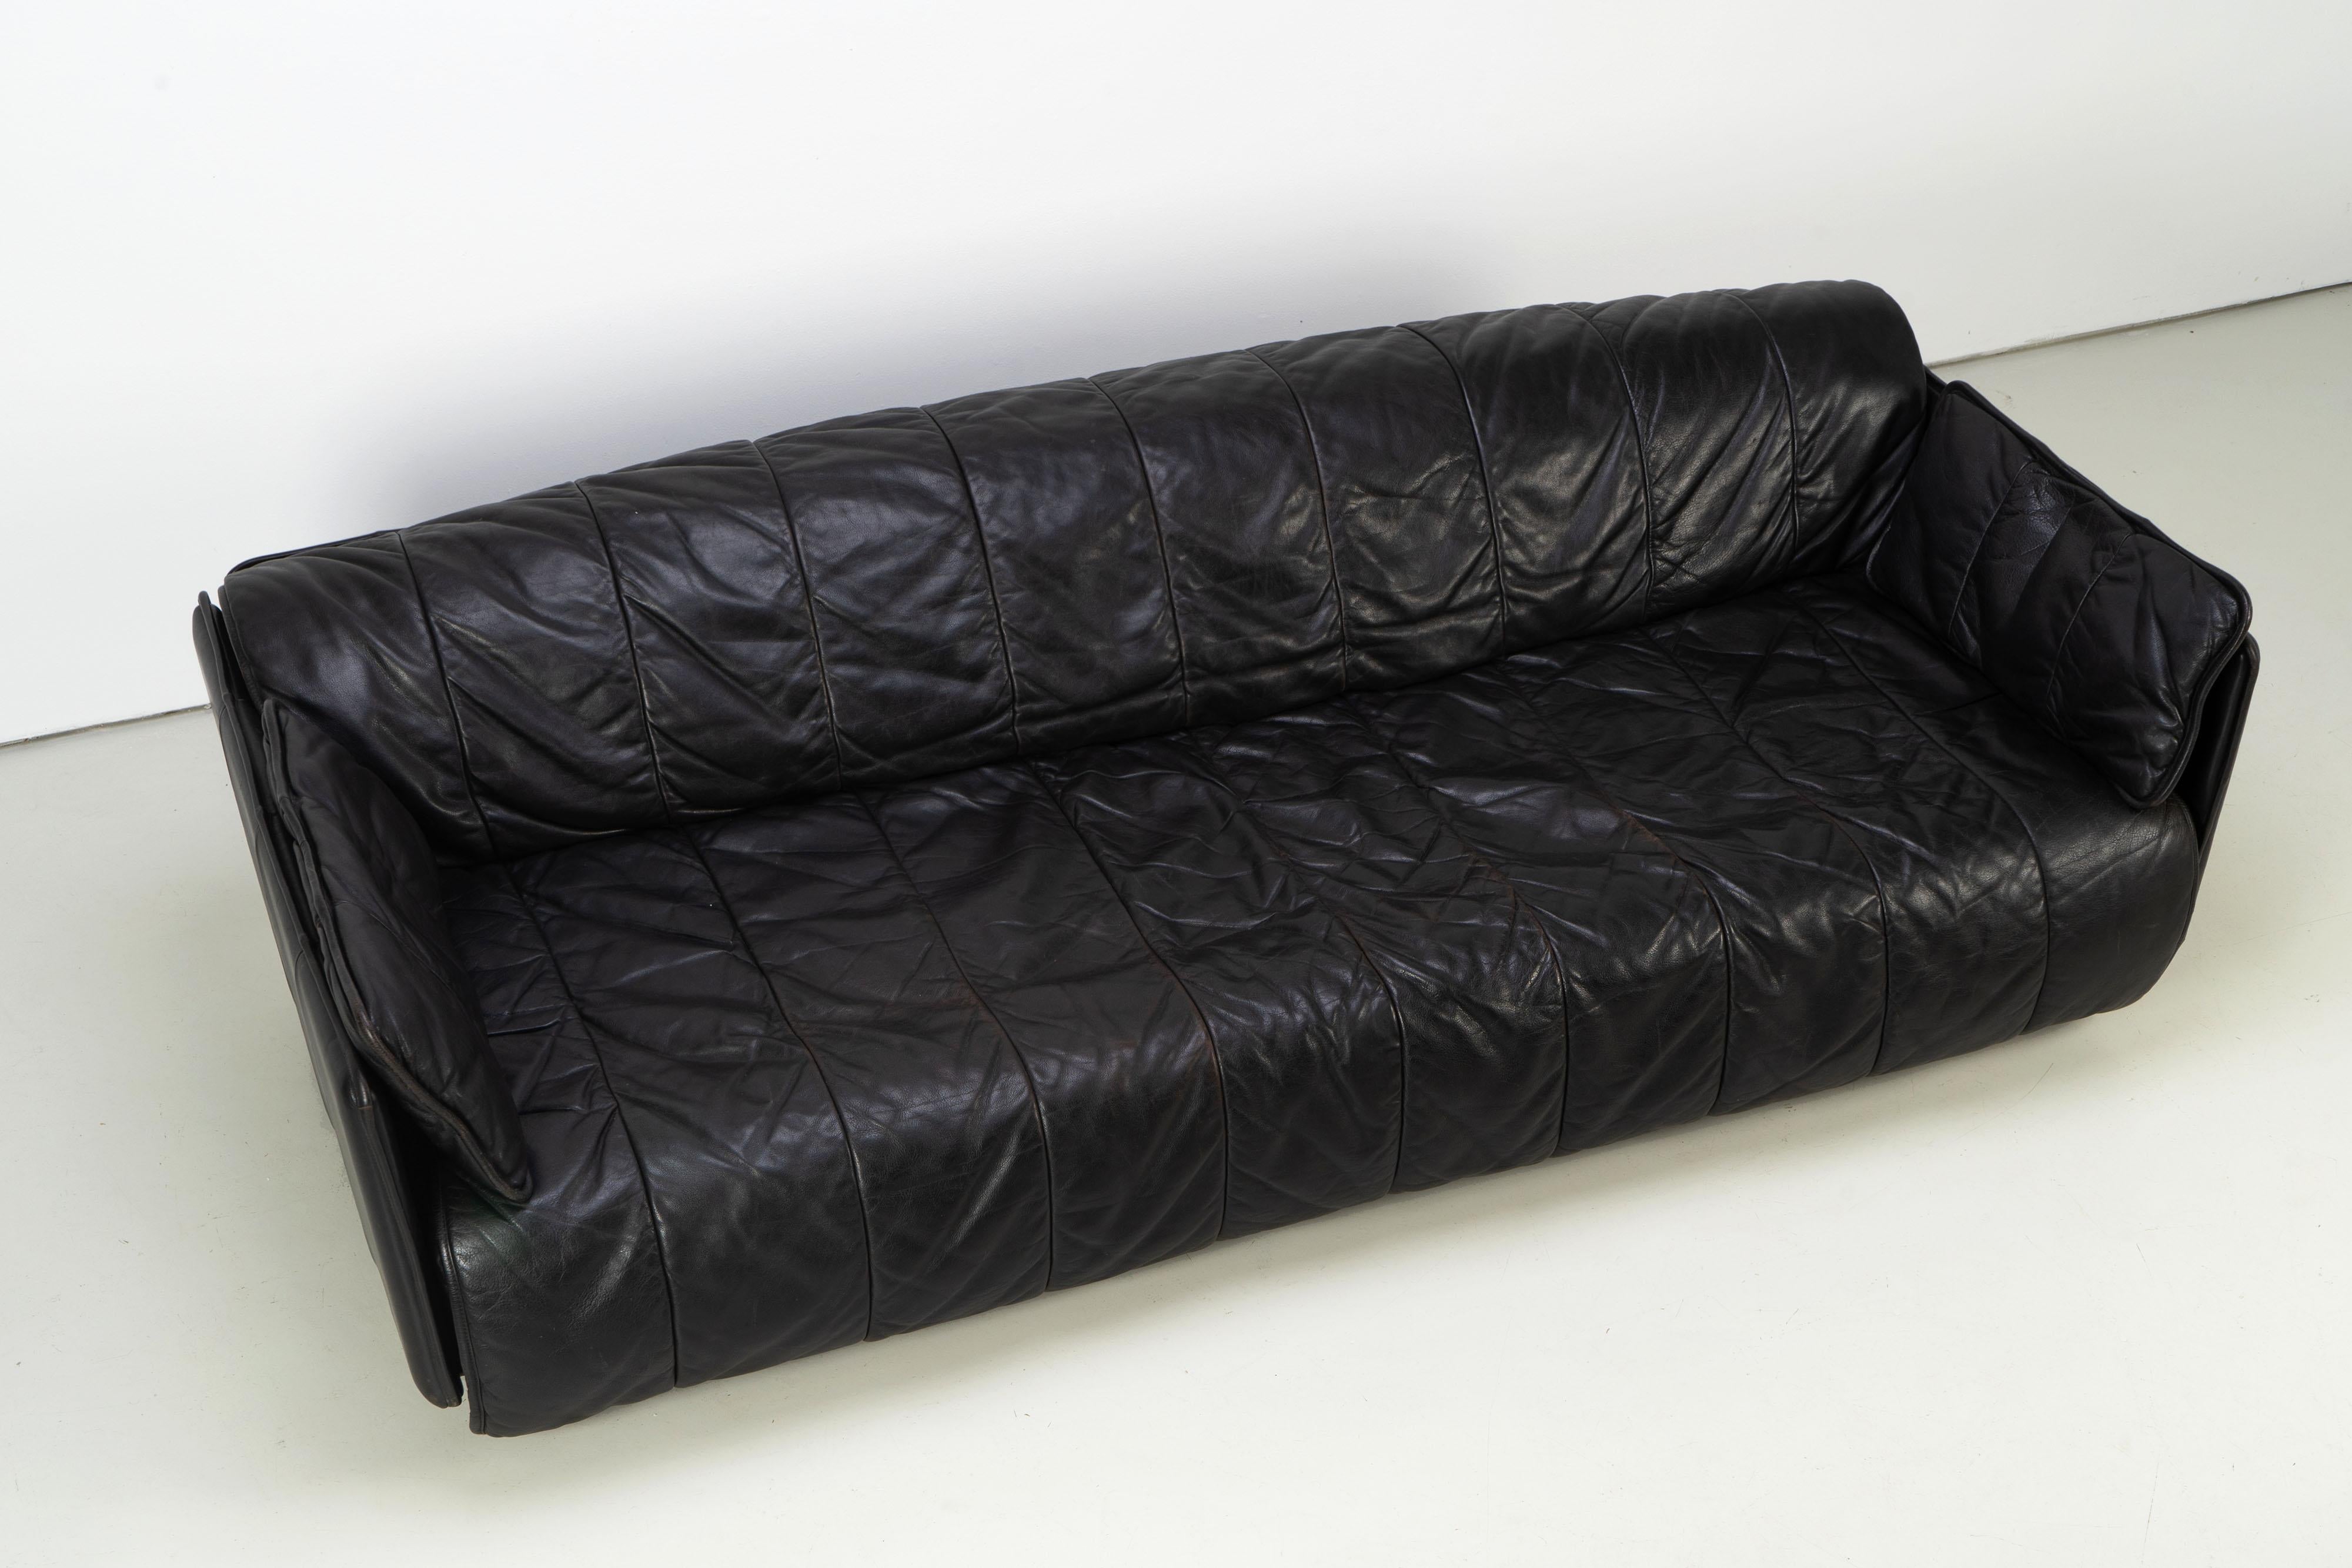 Swiss 1970s Sofa De Sede DS-69 Switzerland Black Leather Daybed For Sale